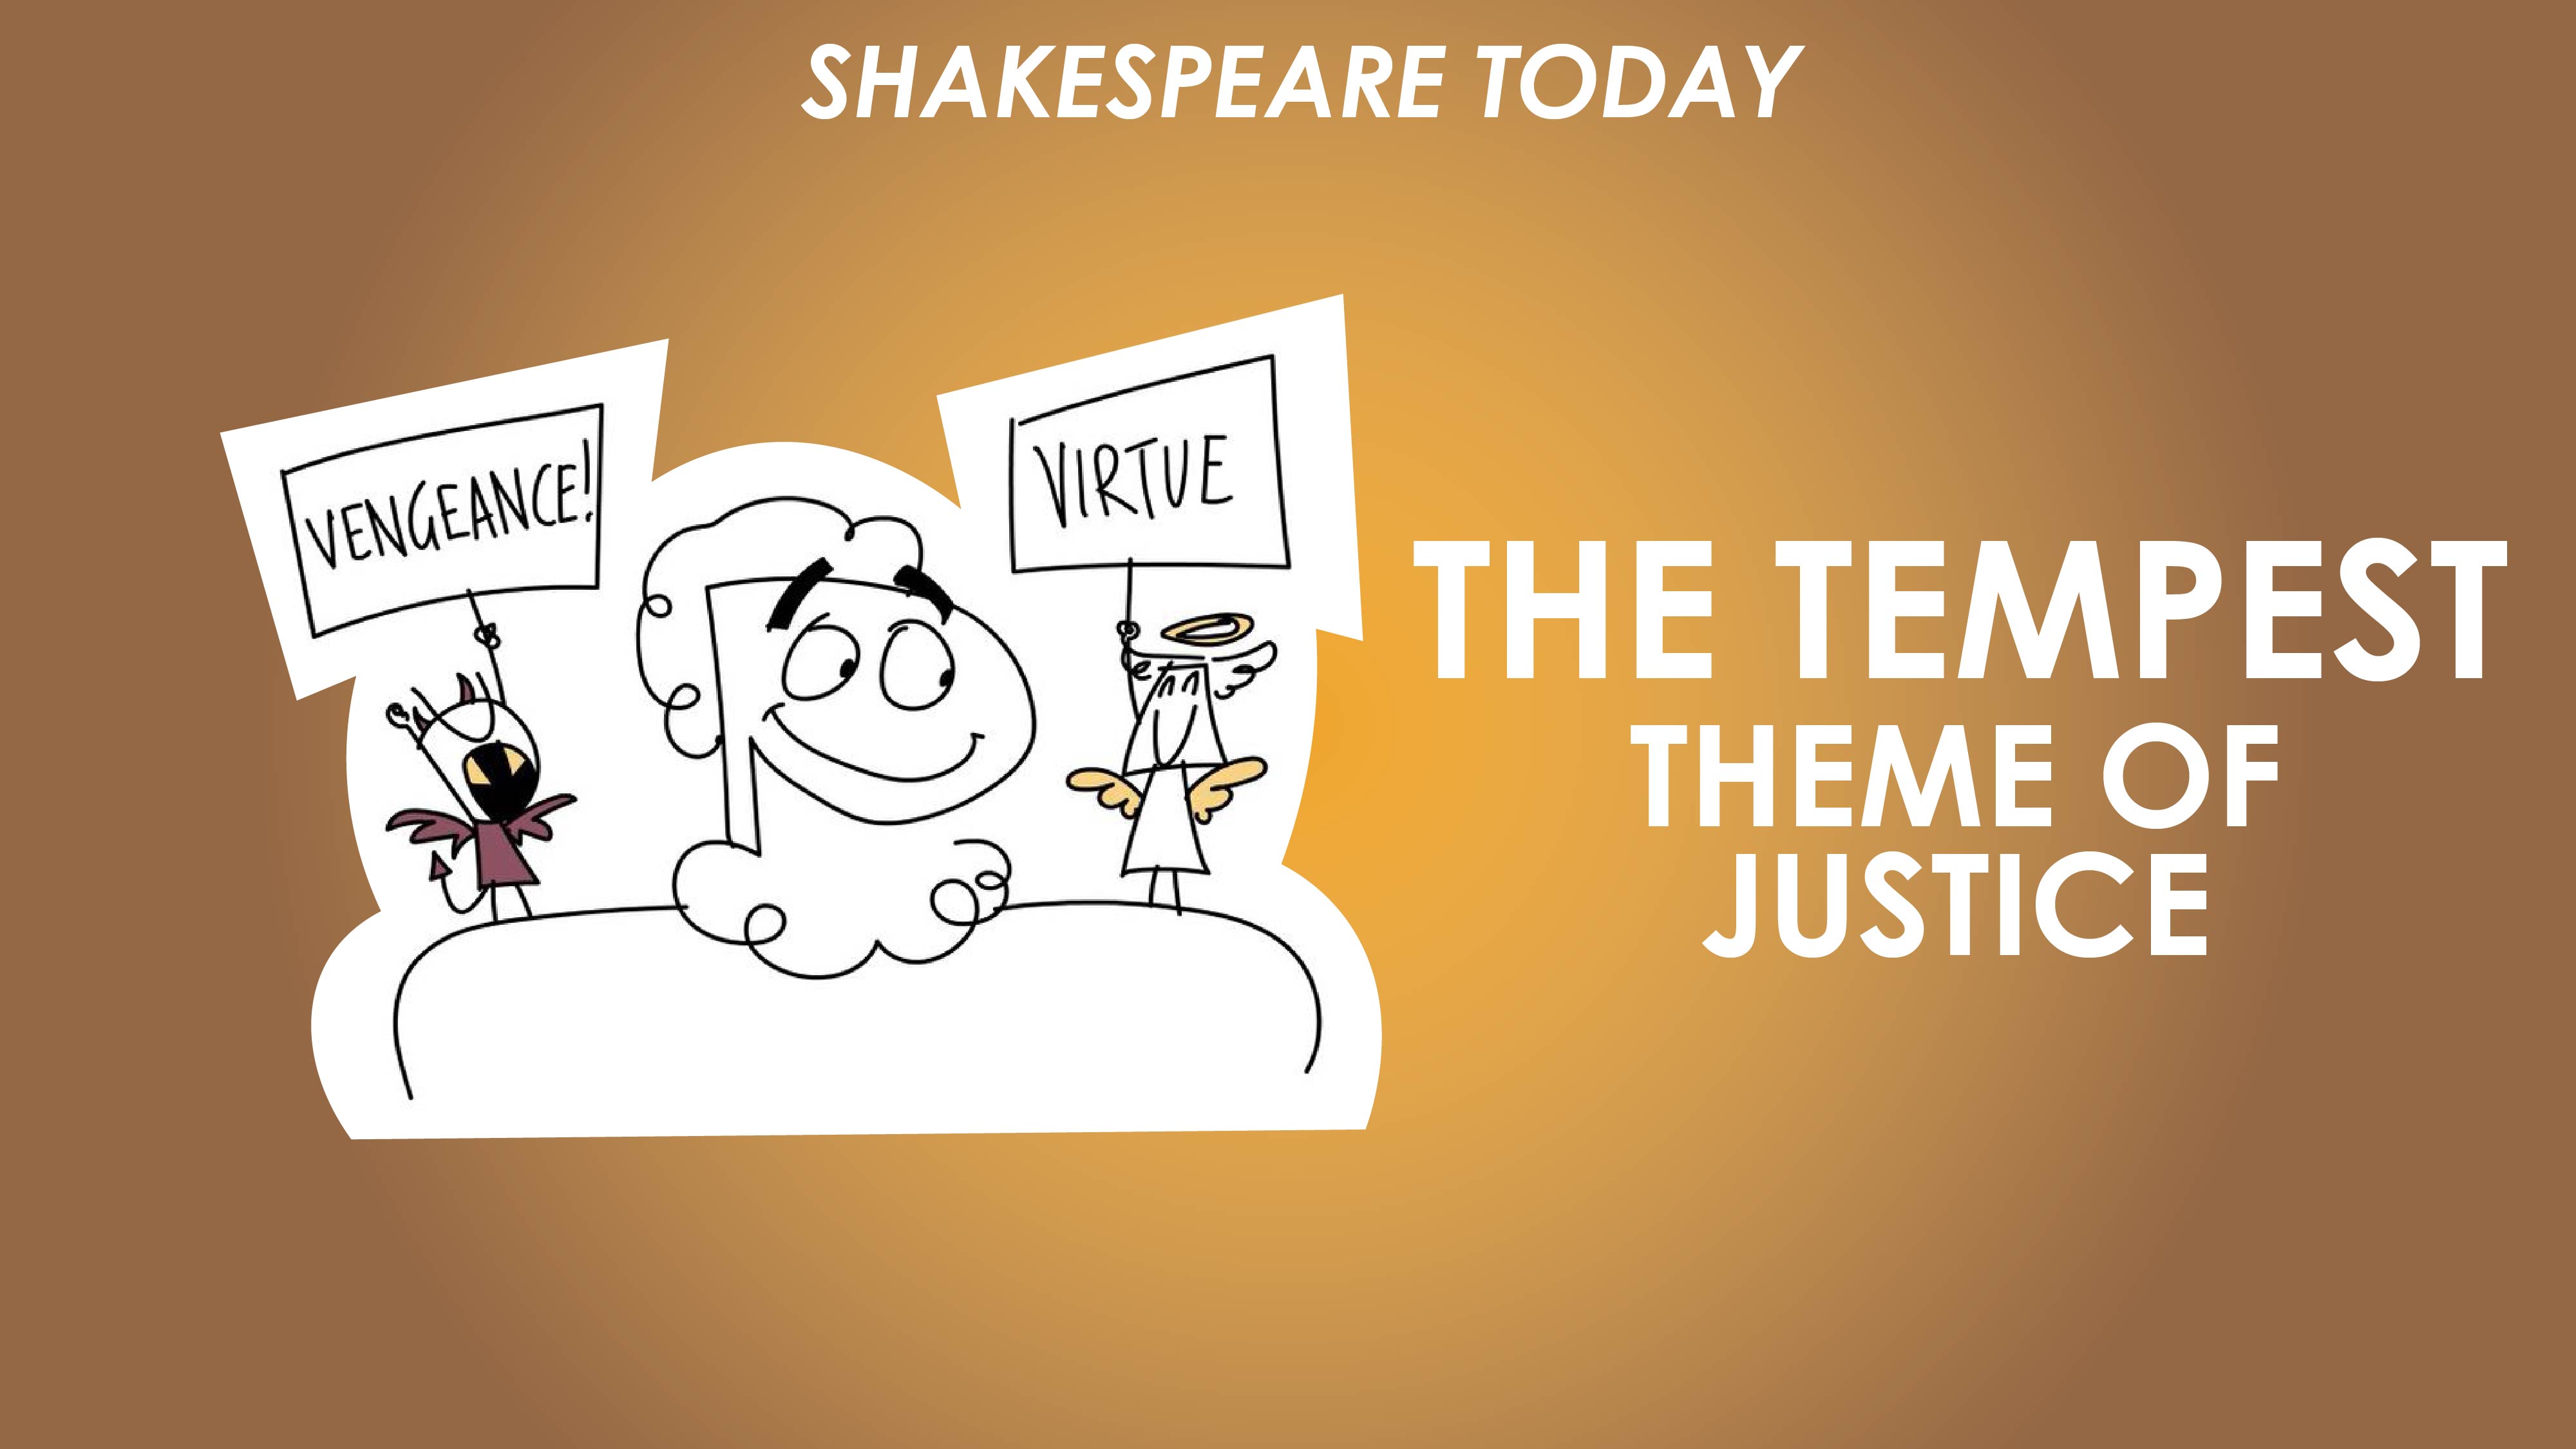 The Tempest Theme of Justice - Shakespeare Today Series